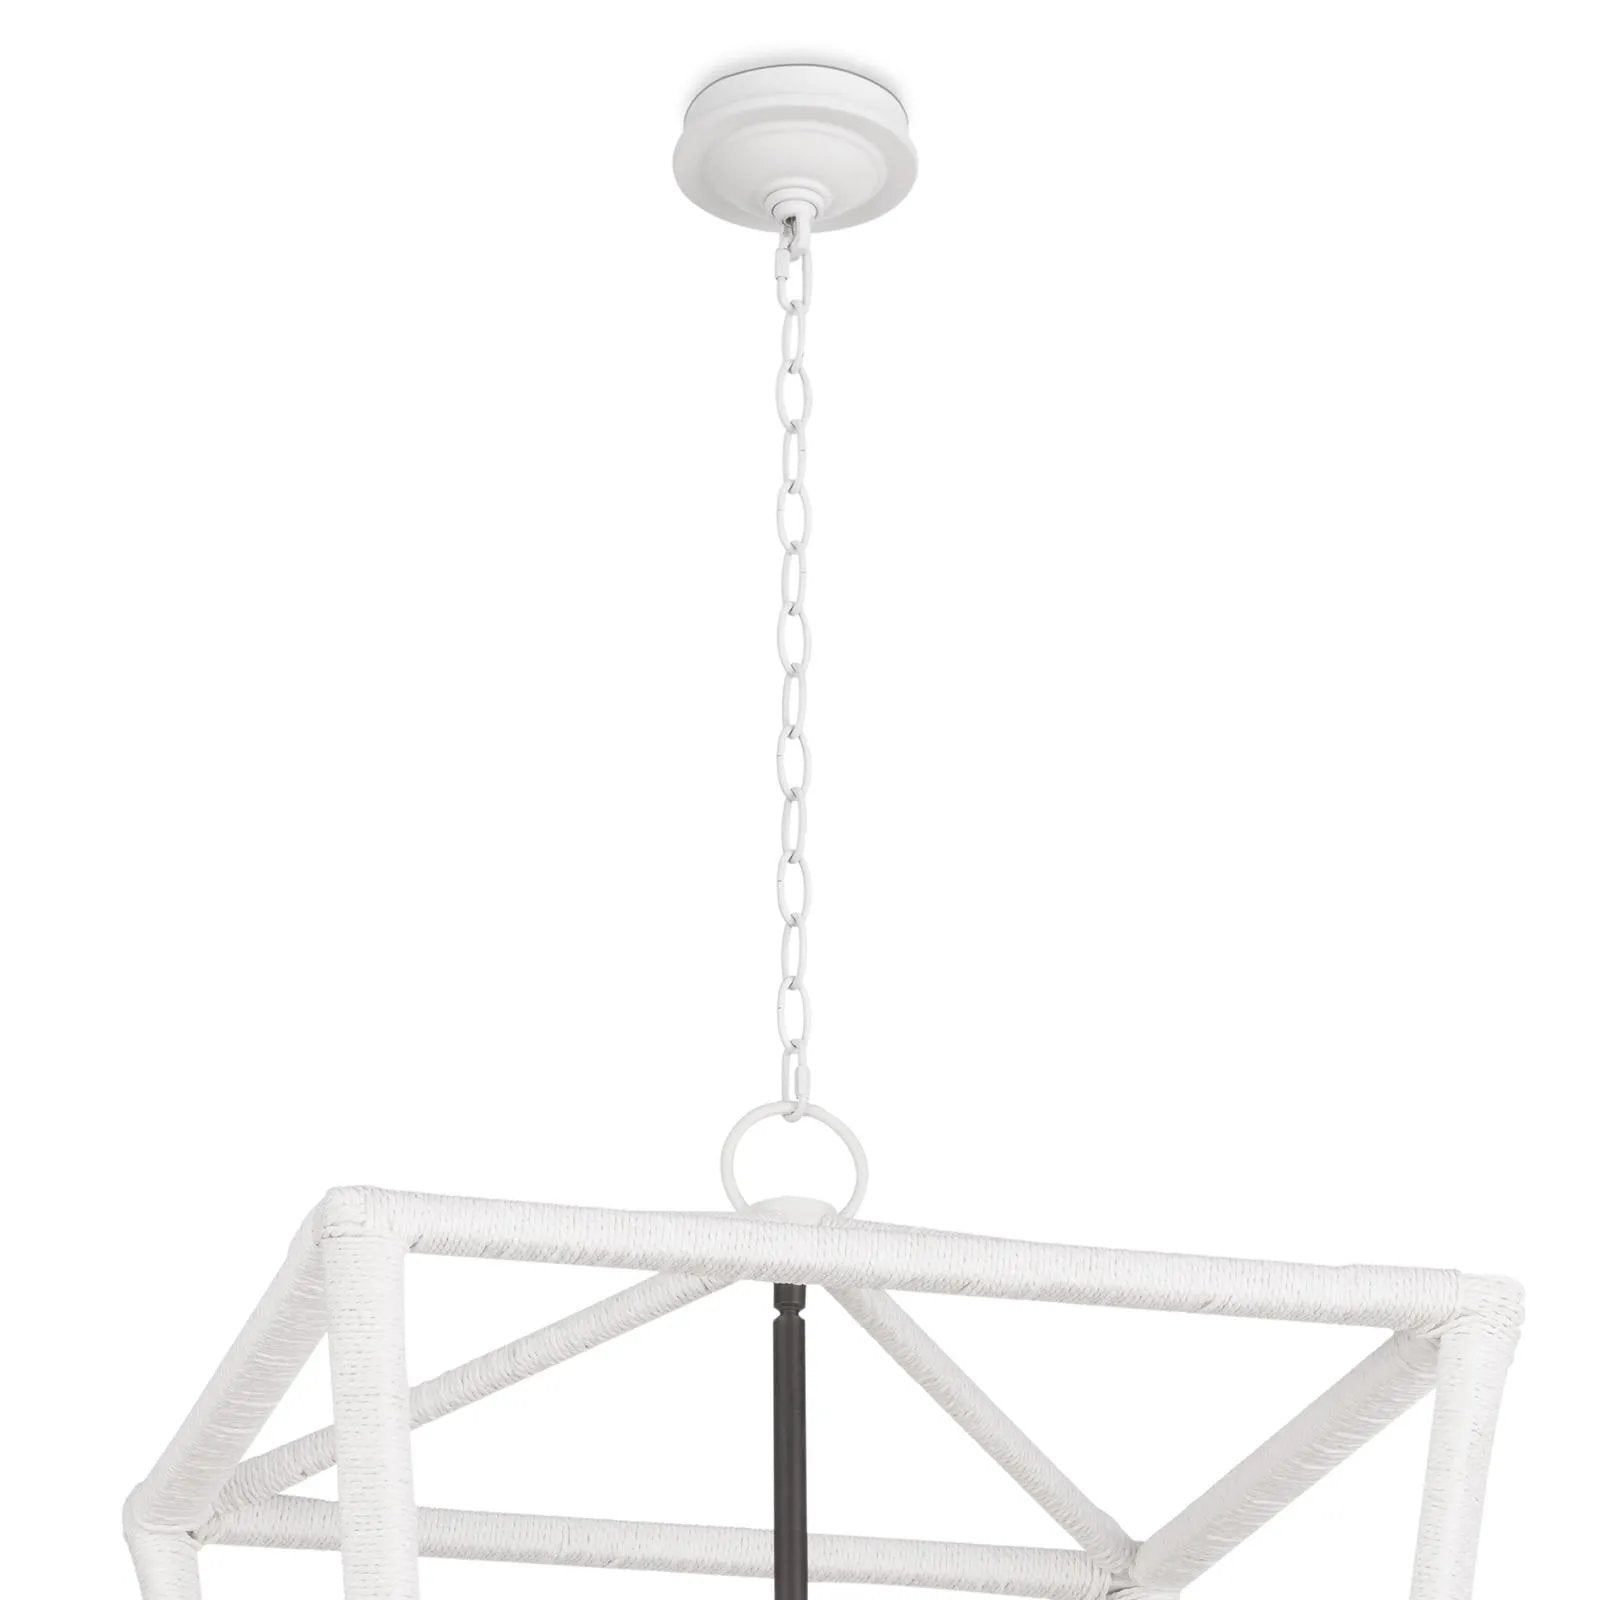 A twist on the traditional lantern, the Luella has a uniquely textured white finish. Elegant, blackened brass candelabra lighting on the interior creates an unexpected statement in your foyer, living room, or dining room. Amethyst Home provides interior design, new home construction design consulting, vintage area rugs, and lighting in the Charlotte metro area.